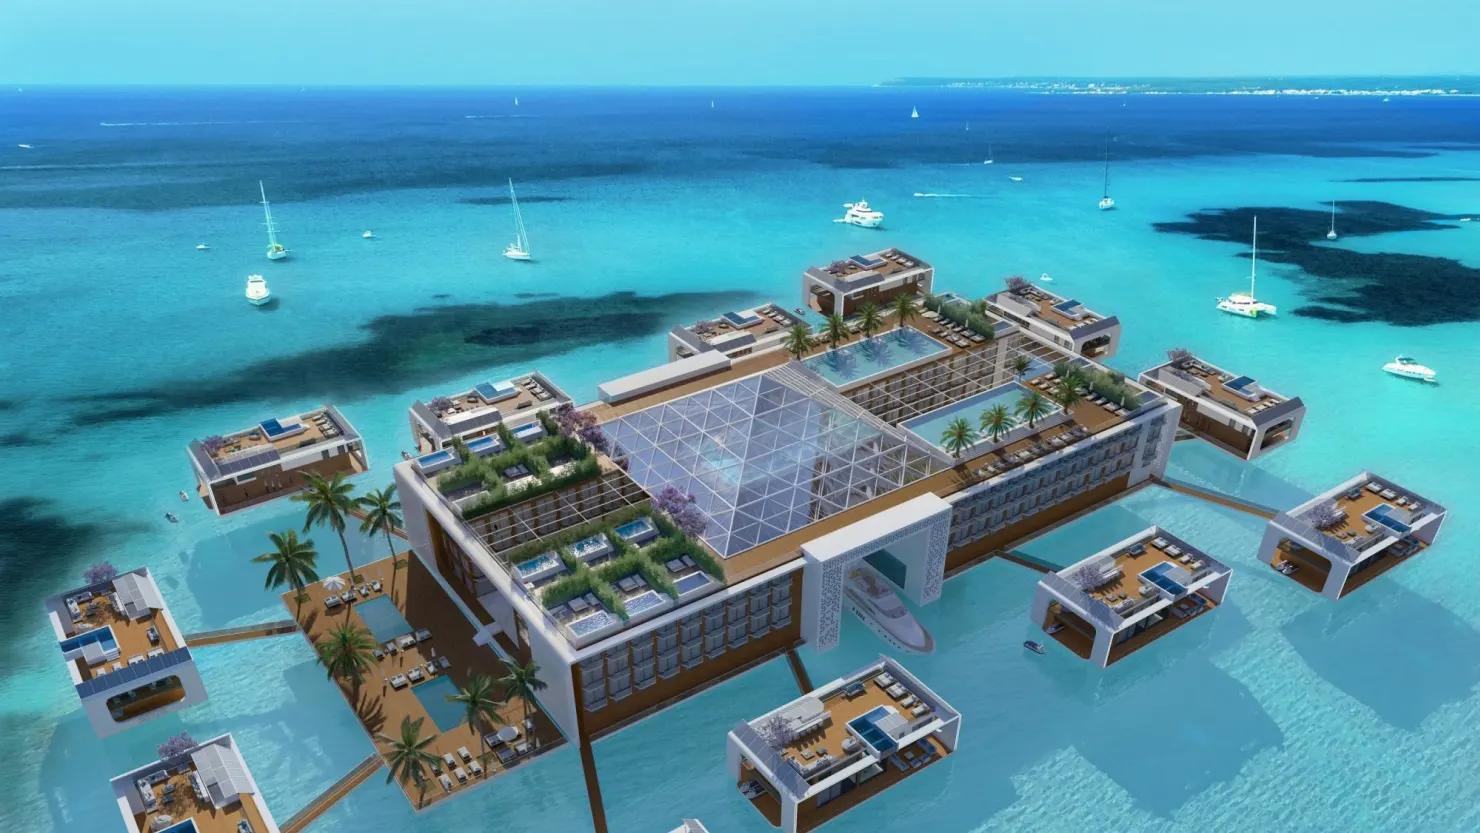 Kempinski Floating Palace in Dubai unveils its first floating villa